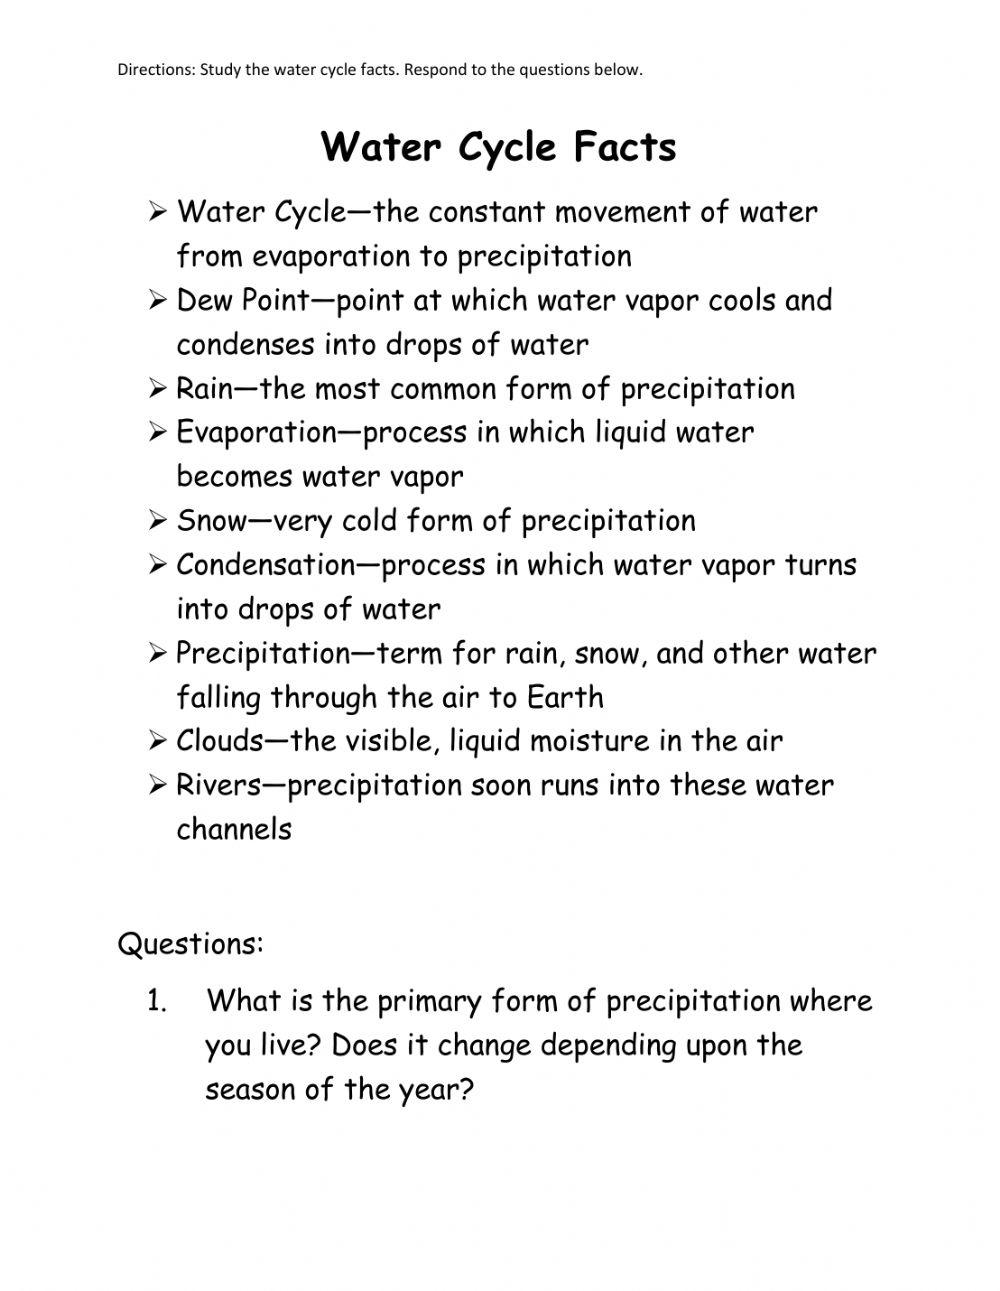 The Water Cycle Facts